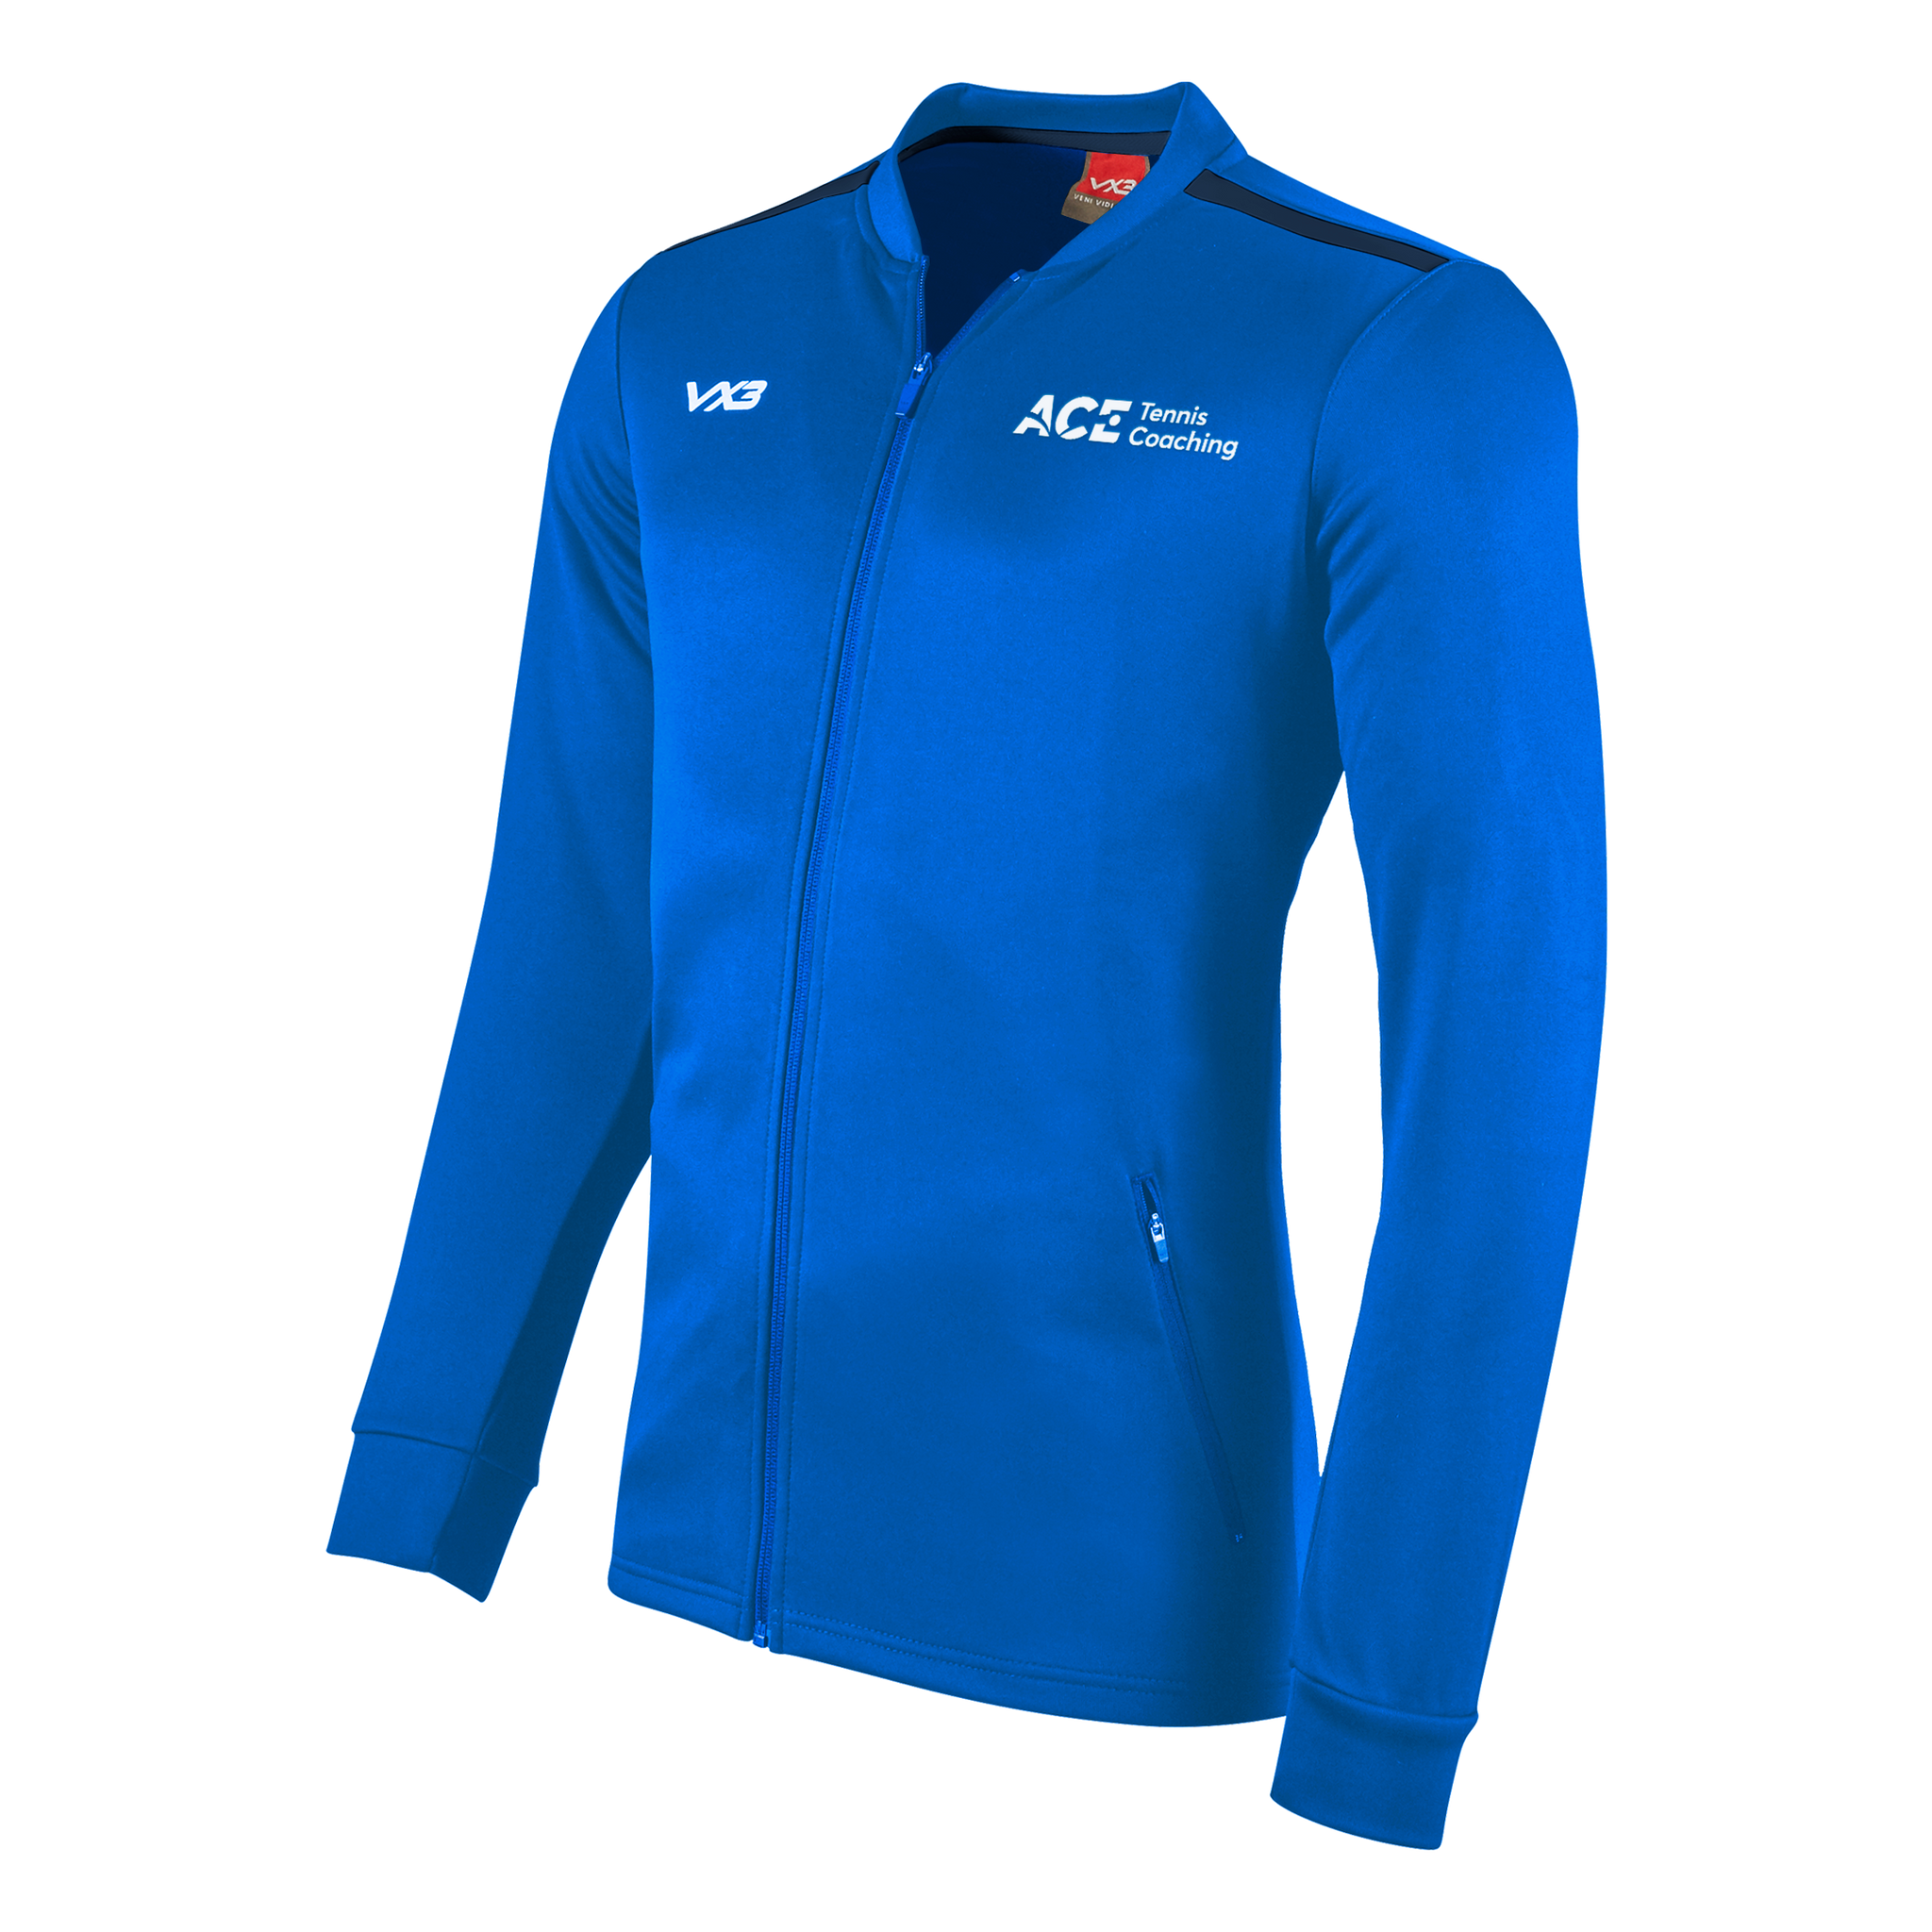 Ace Tennis Coaching Fortis Youth Presentation Jacket